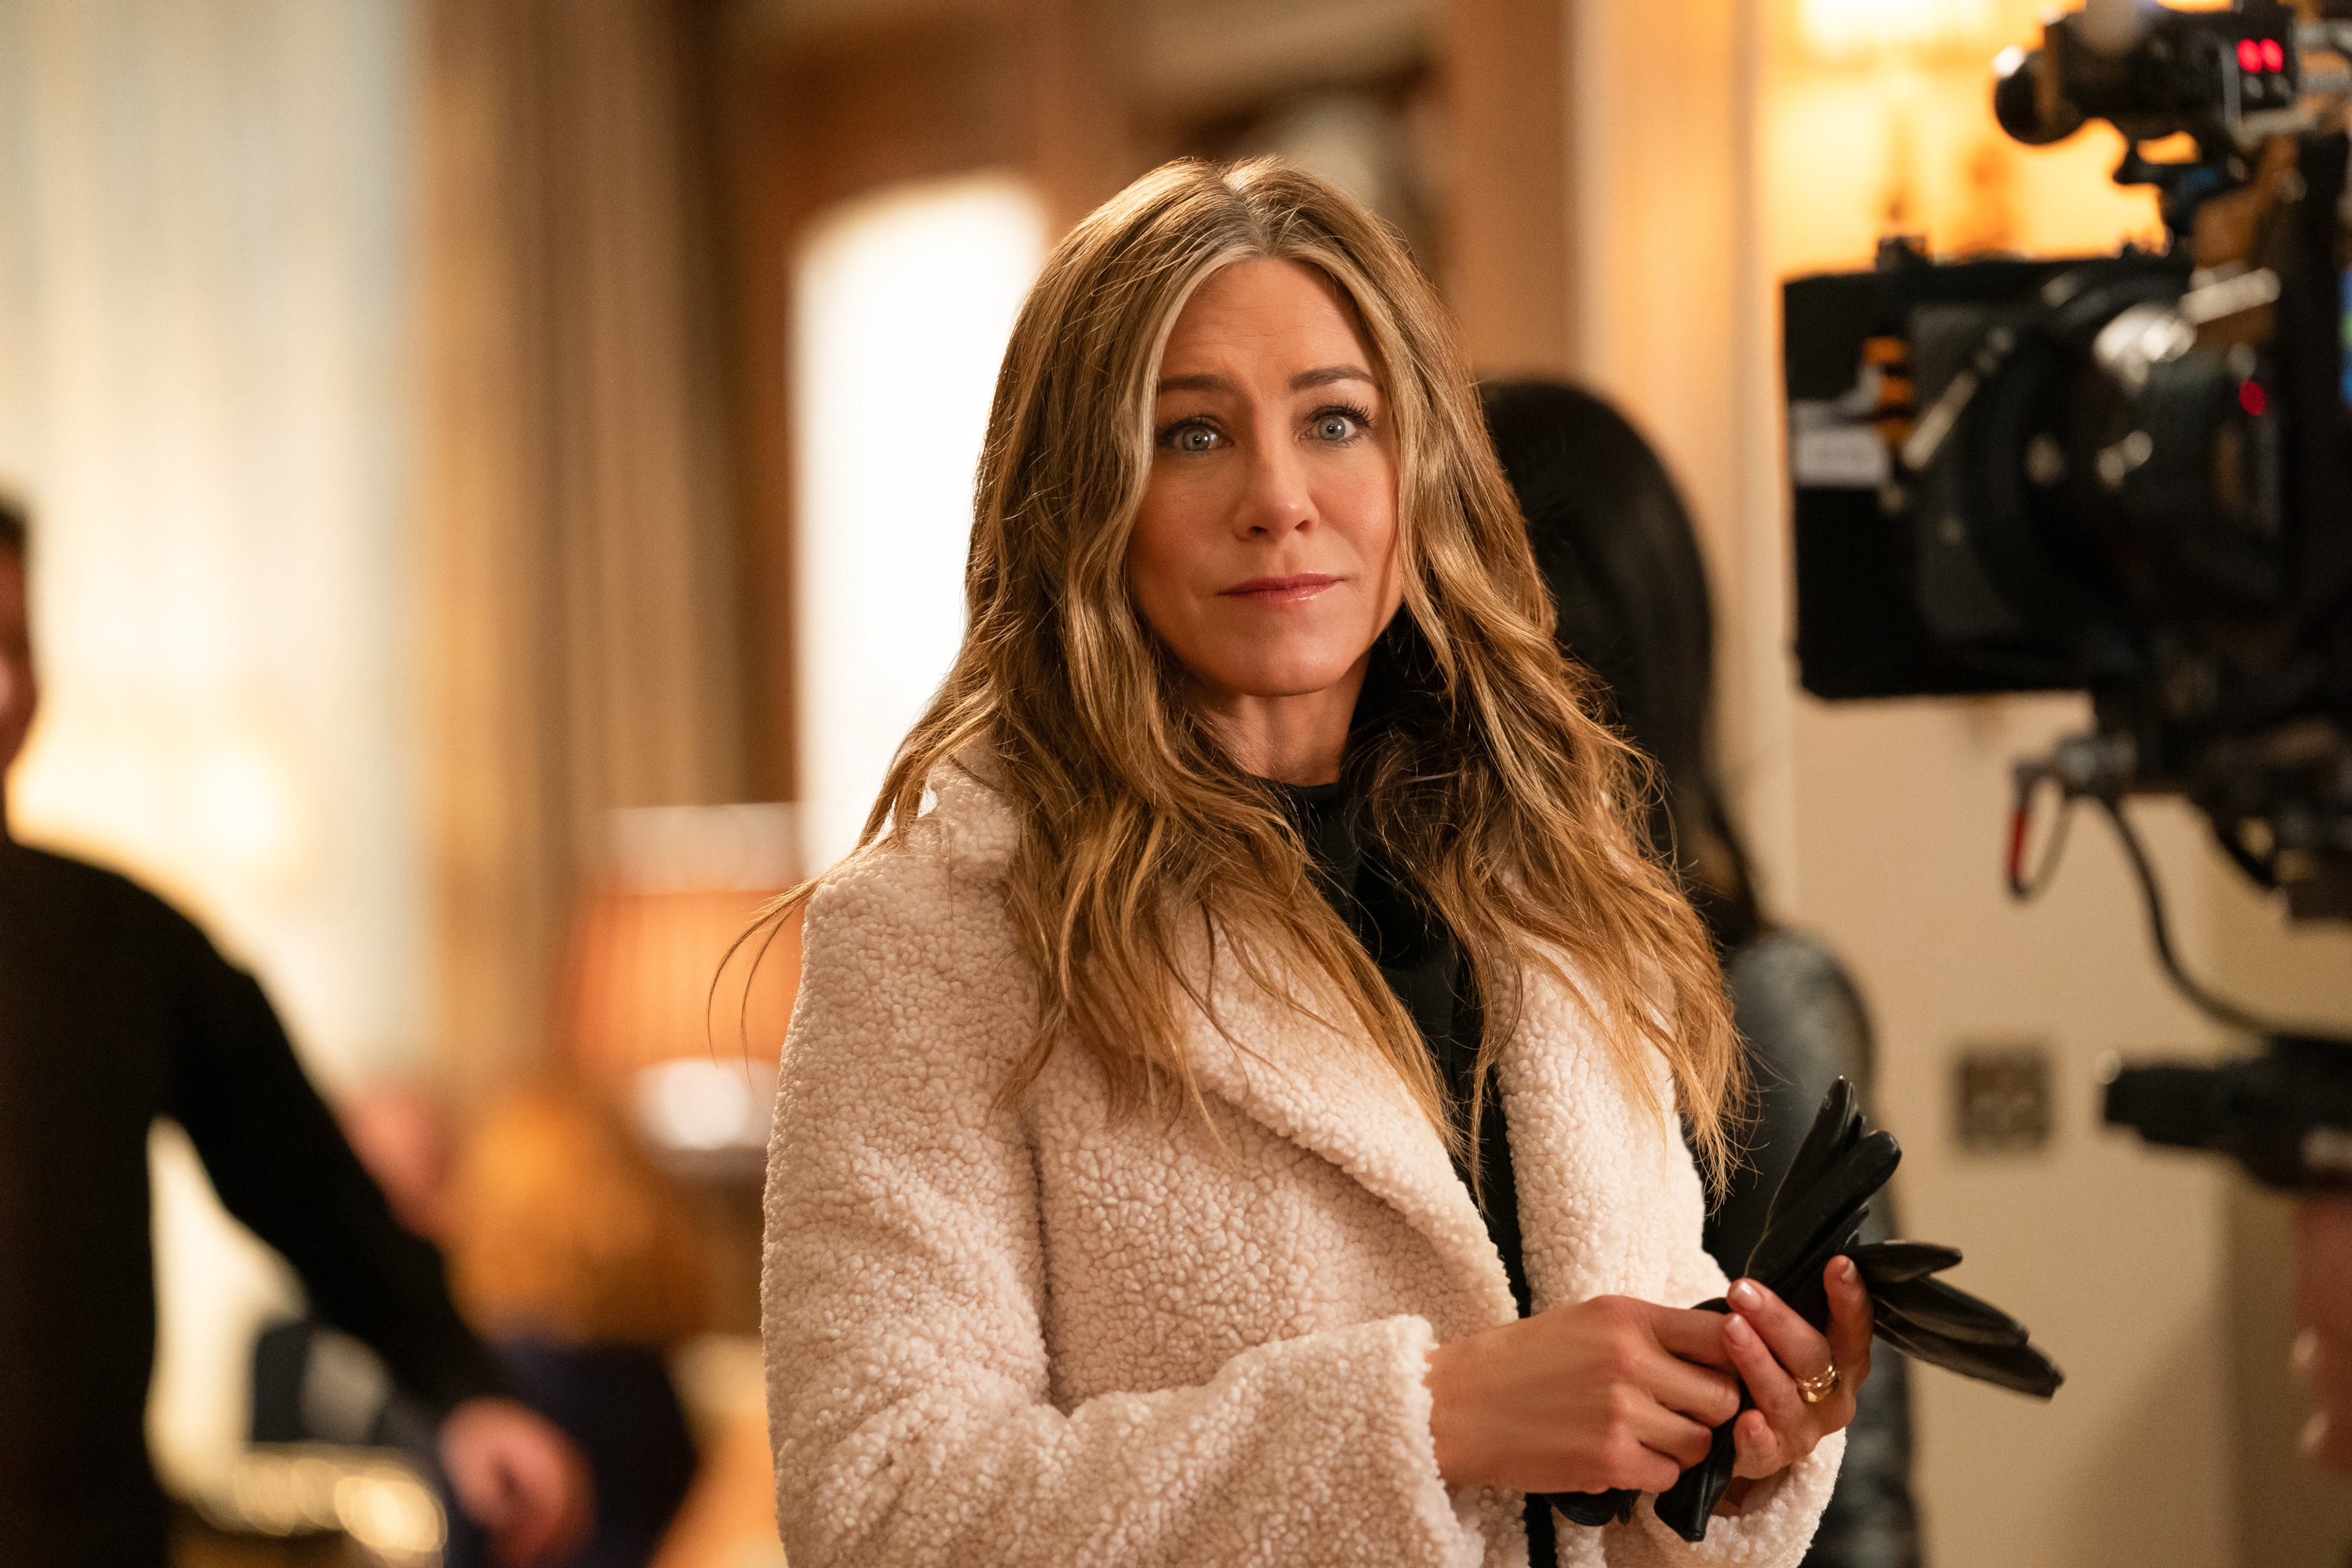 Undated Handout Photo from The Morning Show. Pictured: Jennifer Aniston as Alex Levy. See PA Feature SHOWBIZ TV The Morning Show. Picture credit should read: PA Photo/Courtesy of Apple TV+. WARNING: This picture must only be used to accompany PA Feature SHOWBIZ TV The Morning Show.